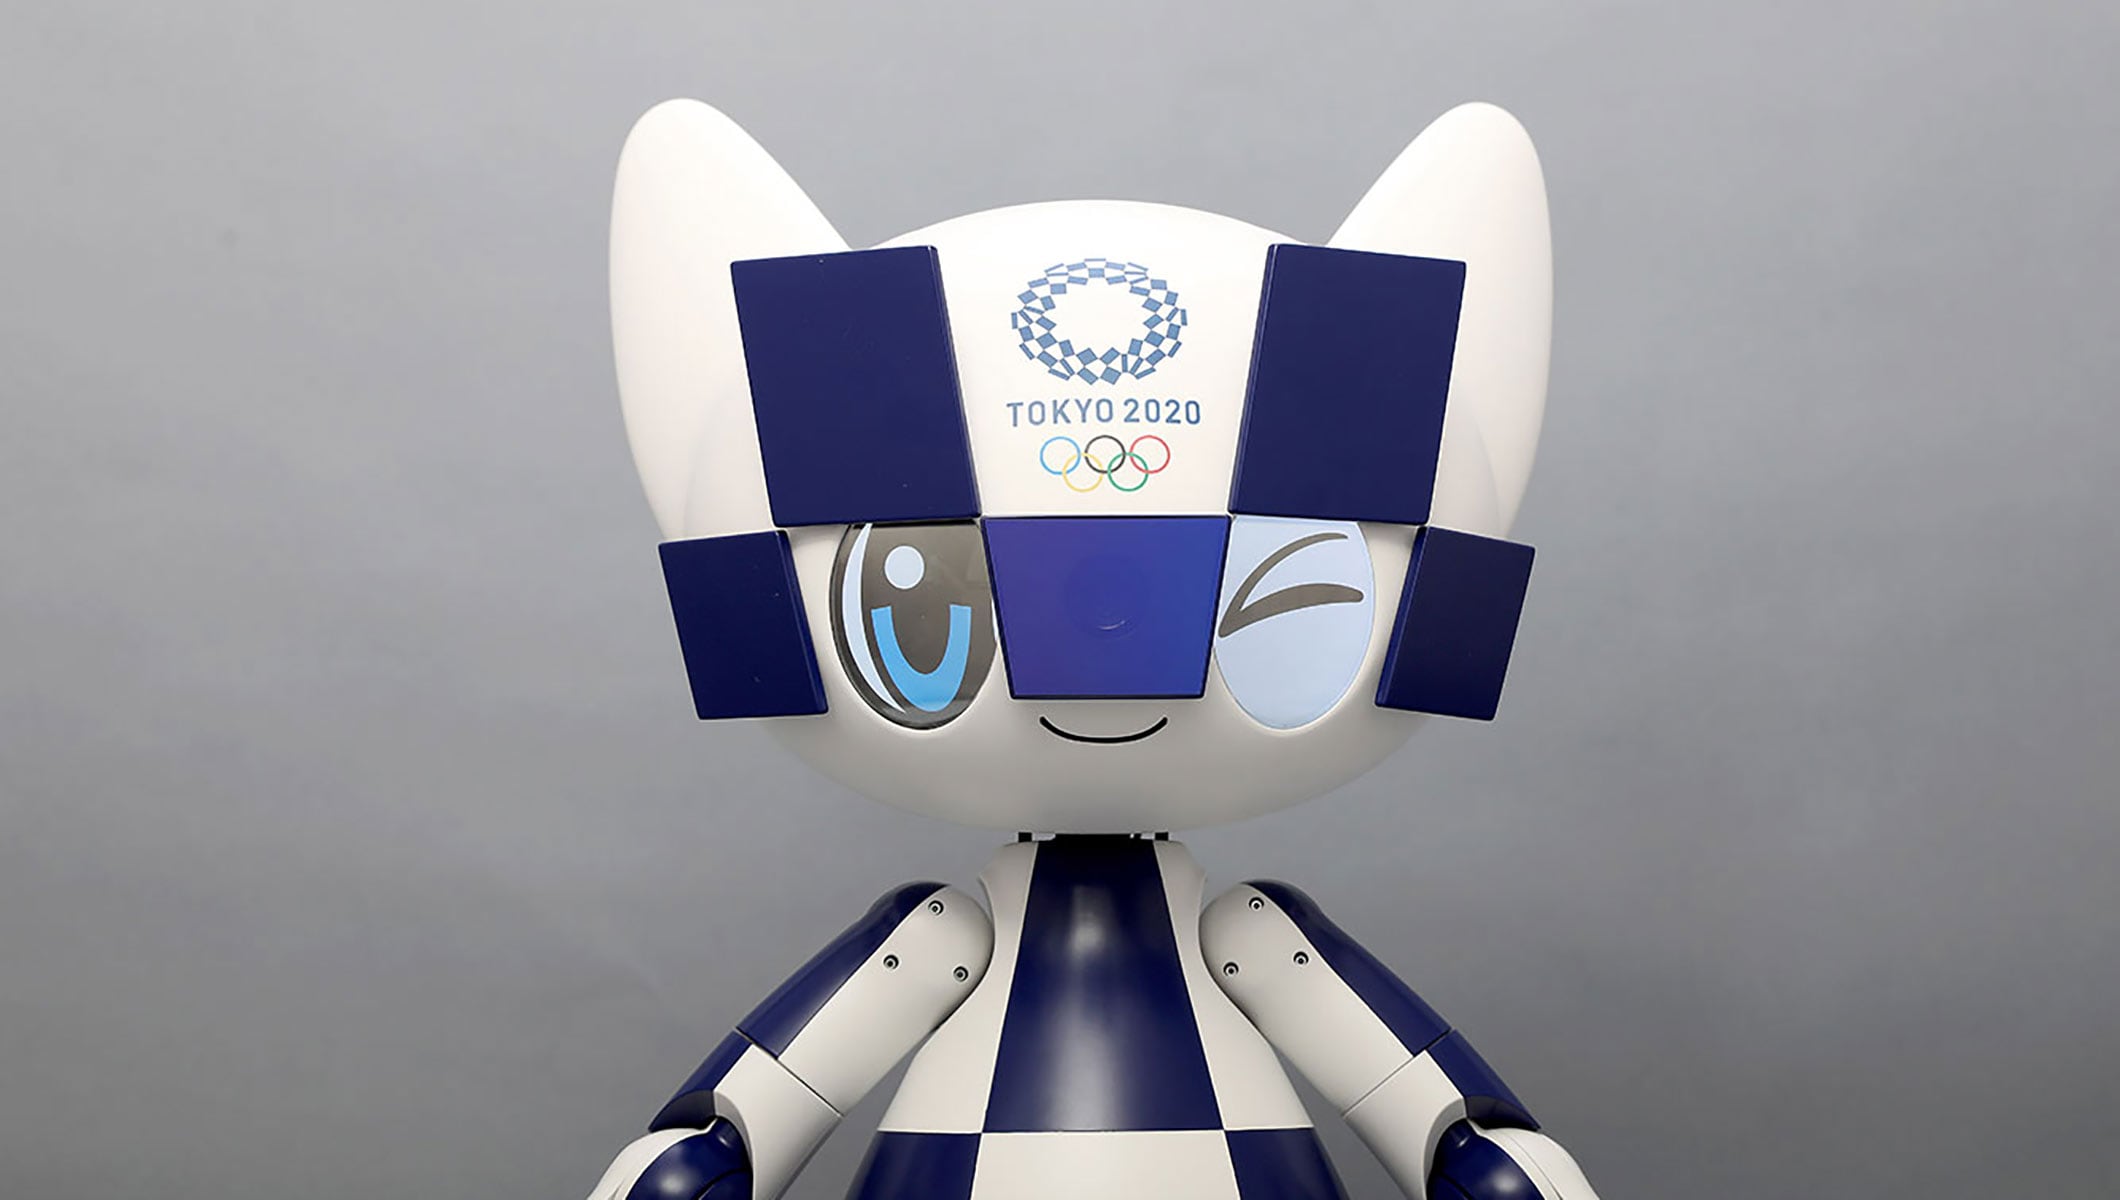 New Robots unveiled Tokyo 2020 Games - Olympic News